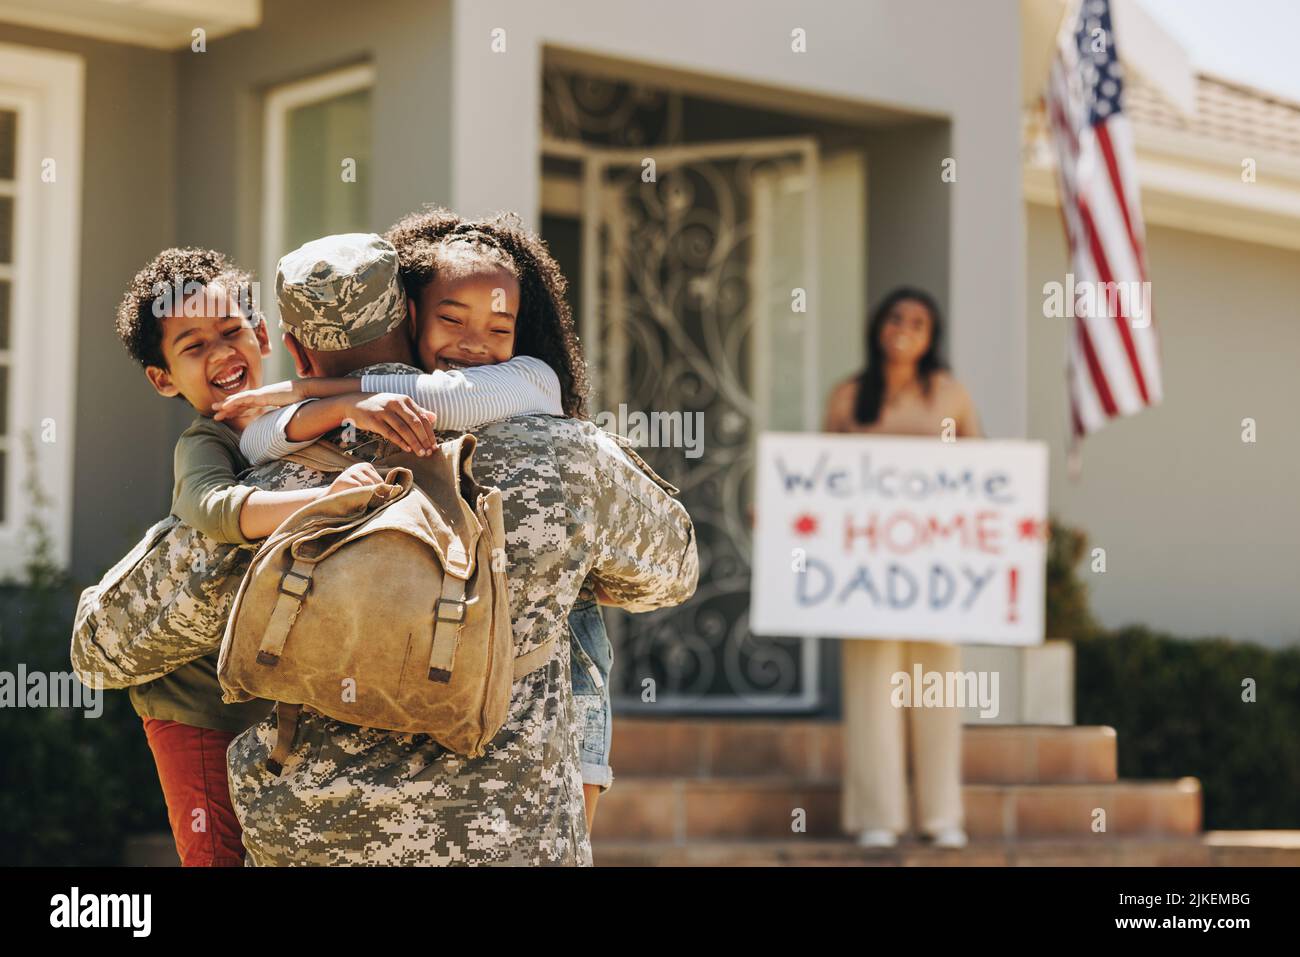 Cheerful children reuniting with their military dad. Two happy young children embracing their father upon his return from the army. American servicema Stock Photo